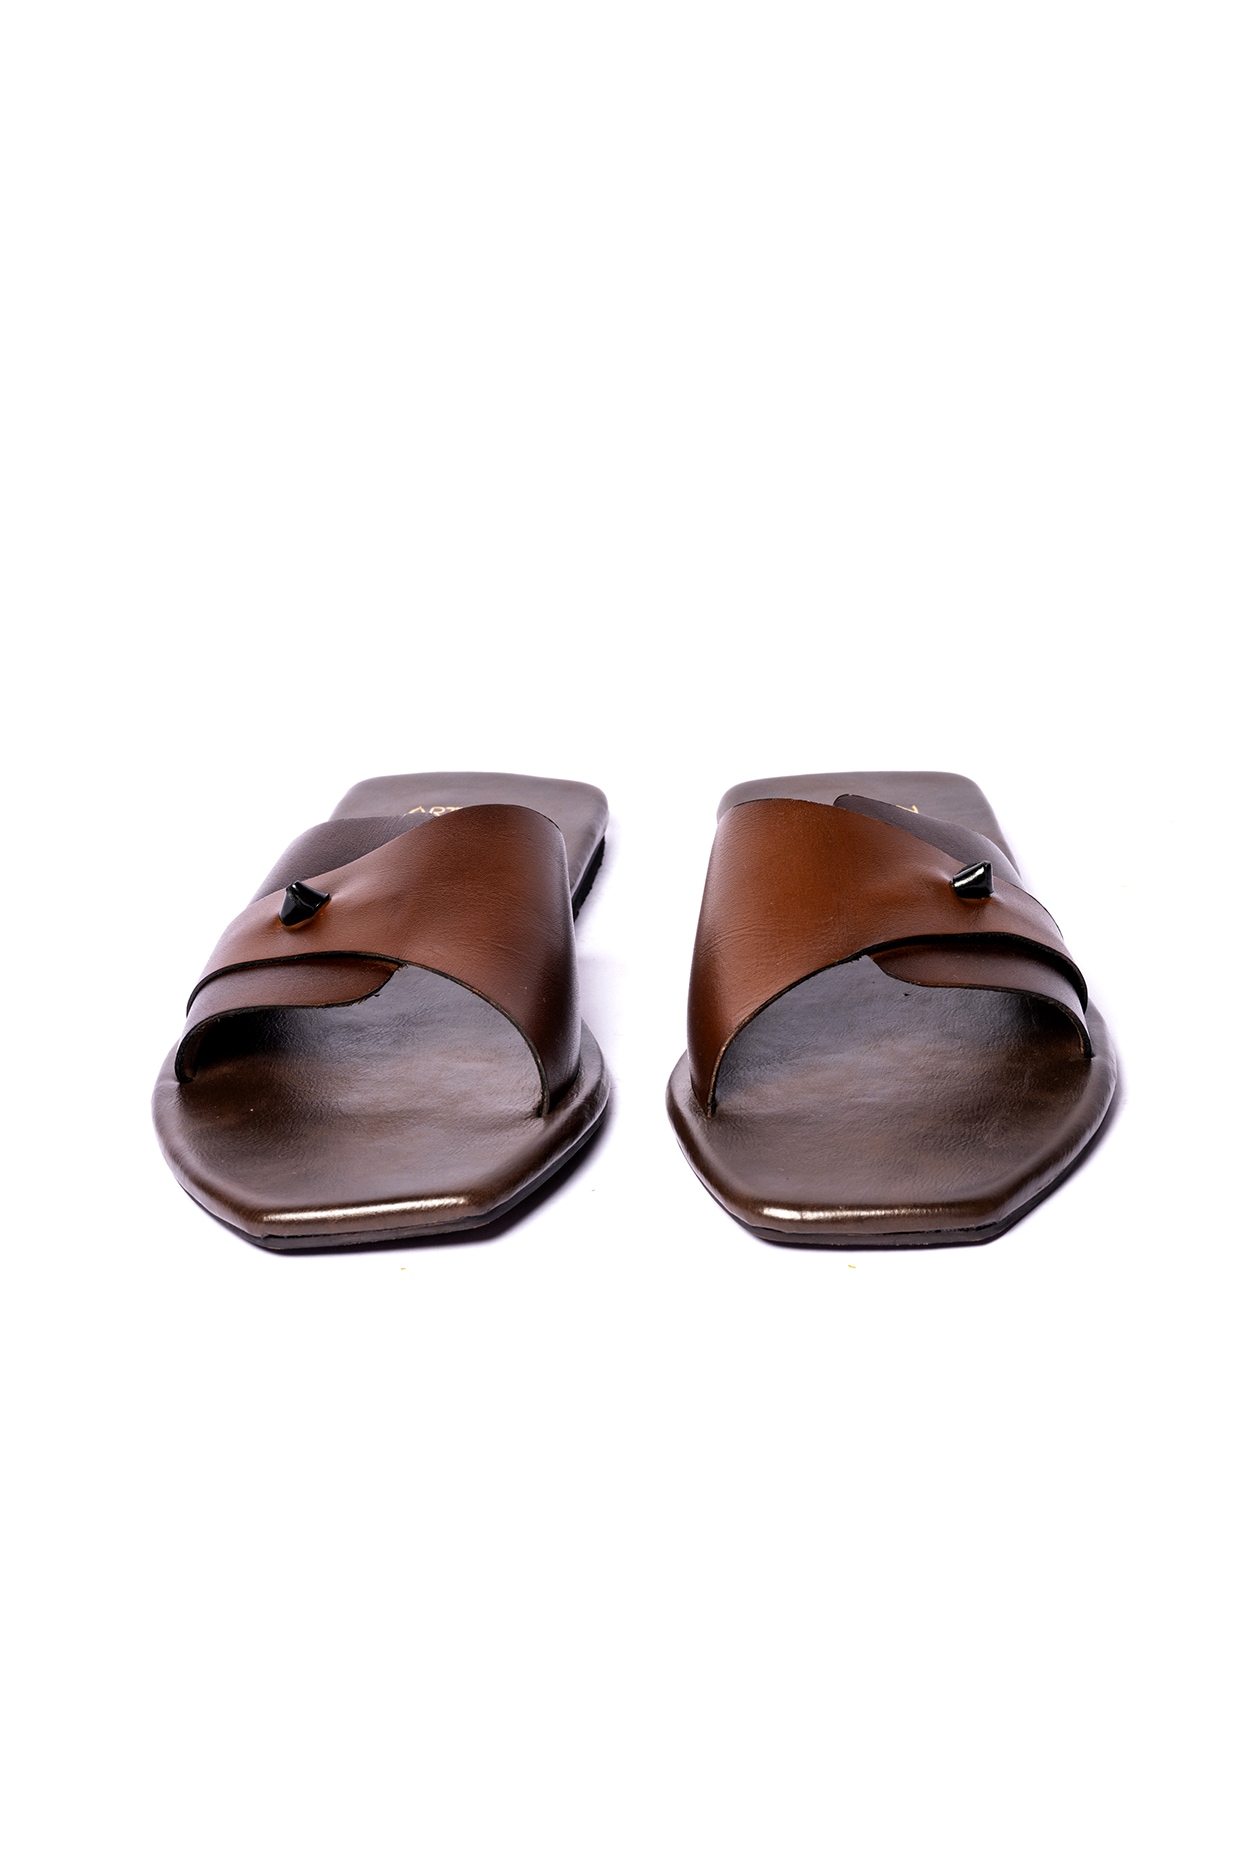 Update more than 57 latest leather slippers design